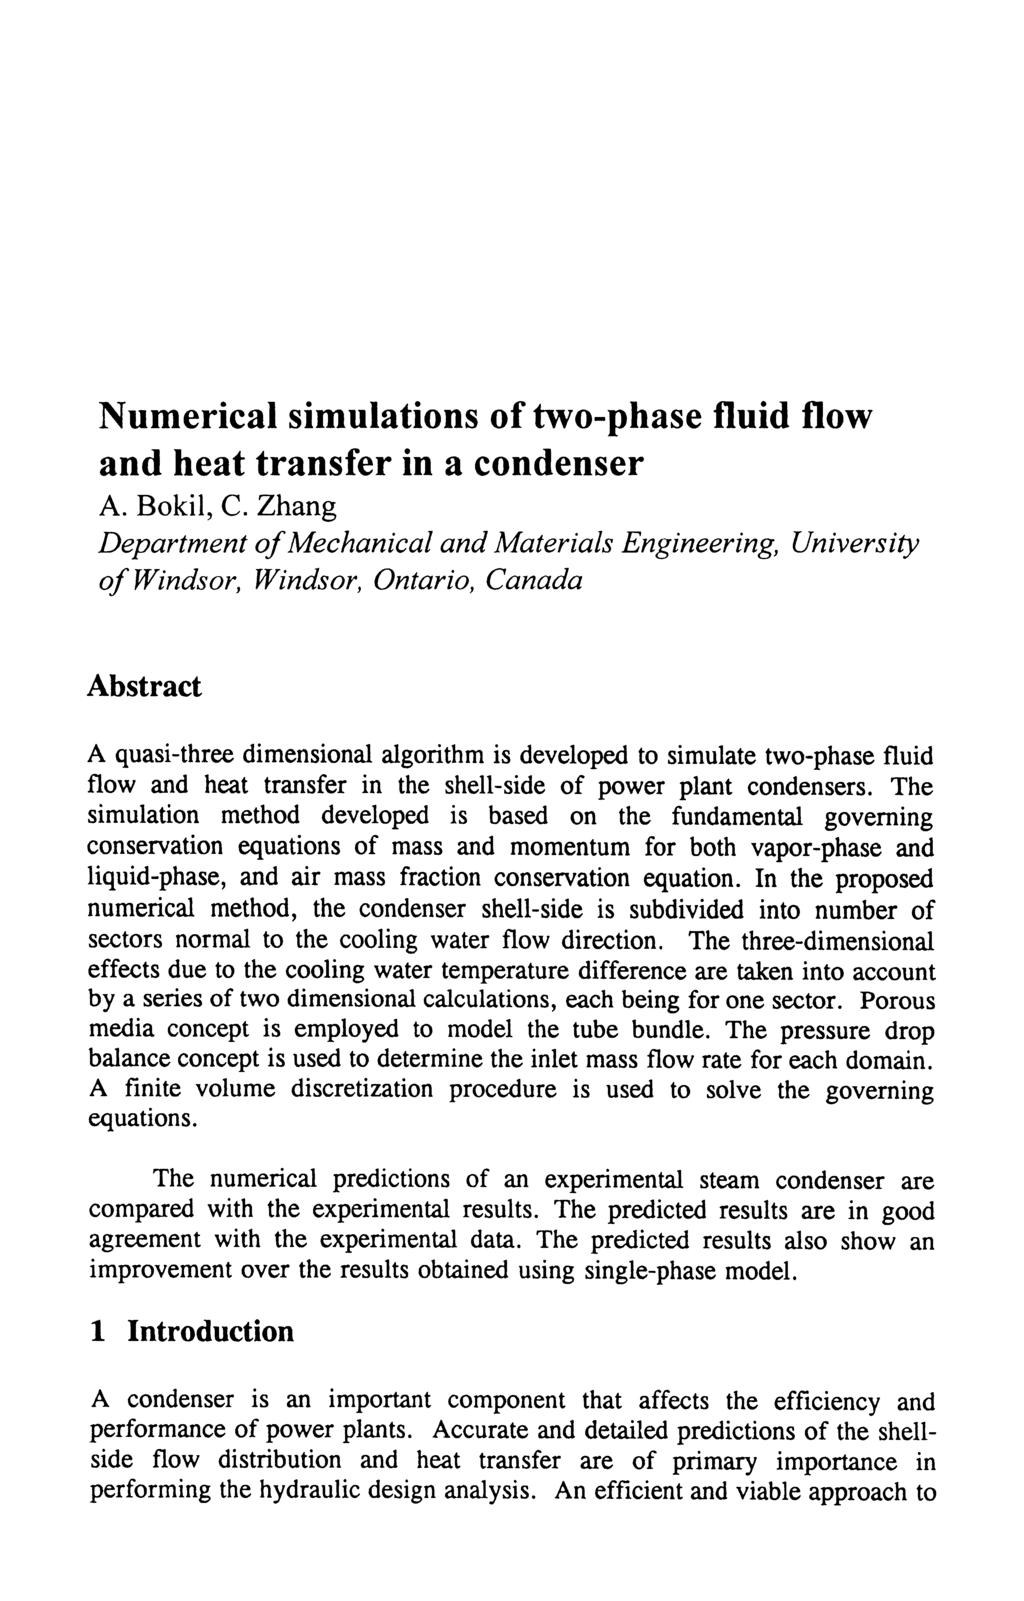 Numerical simulations of two-phase fluid flow and heat transfer in a condenser A. Bokil, C.